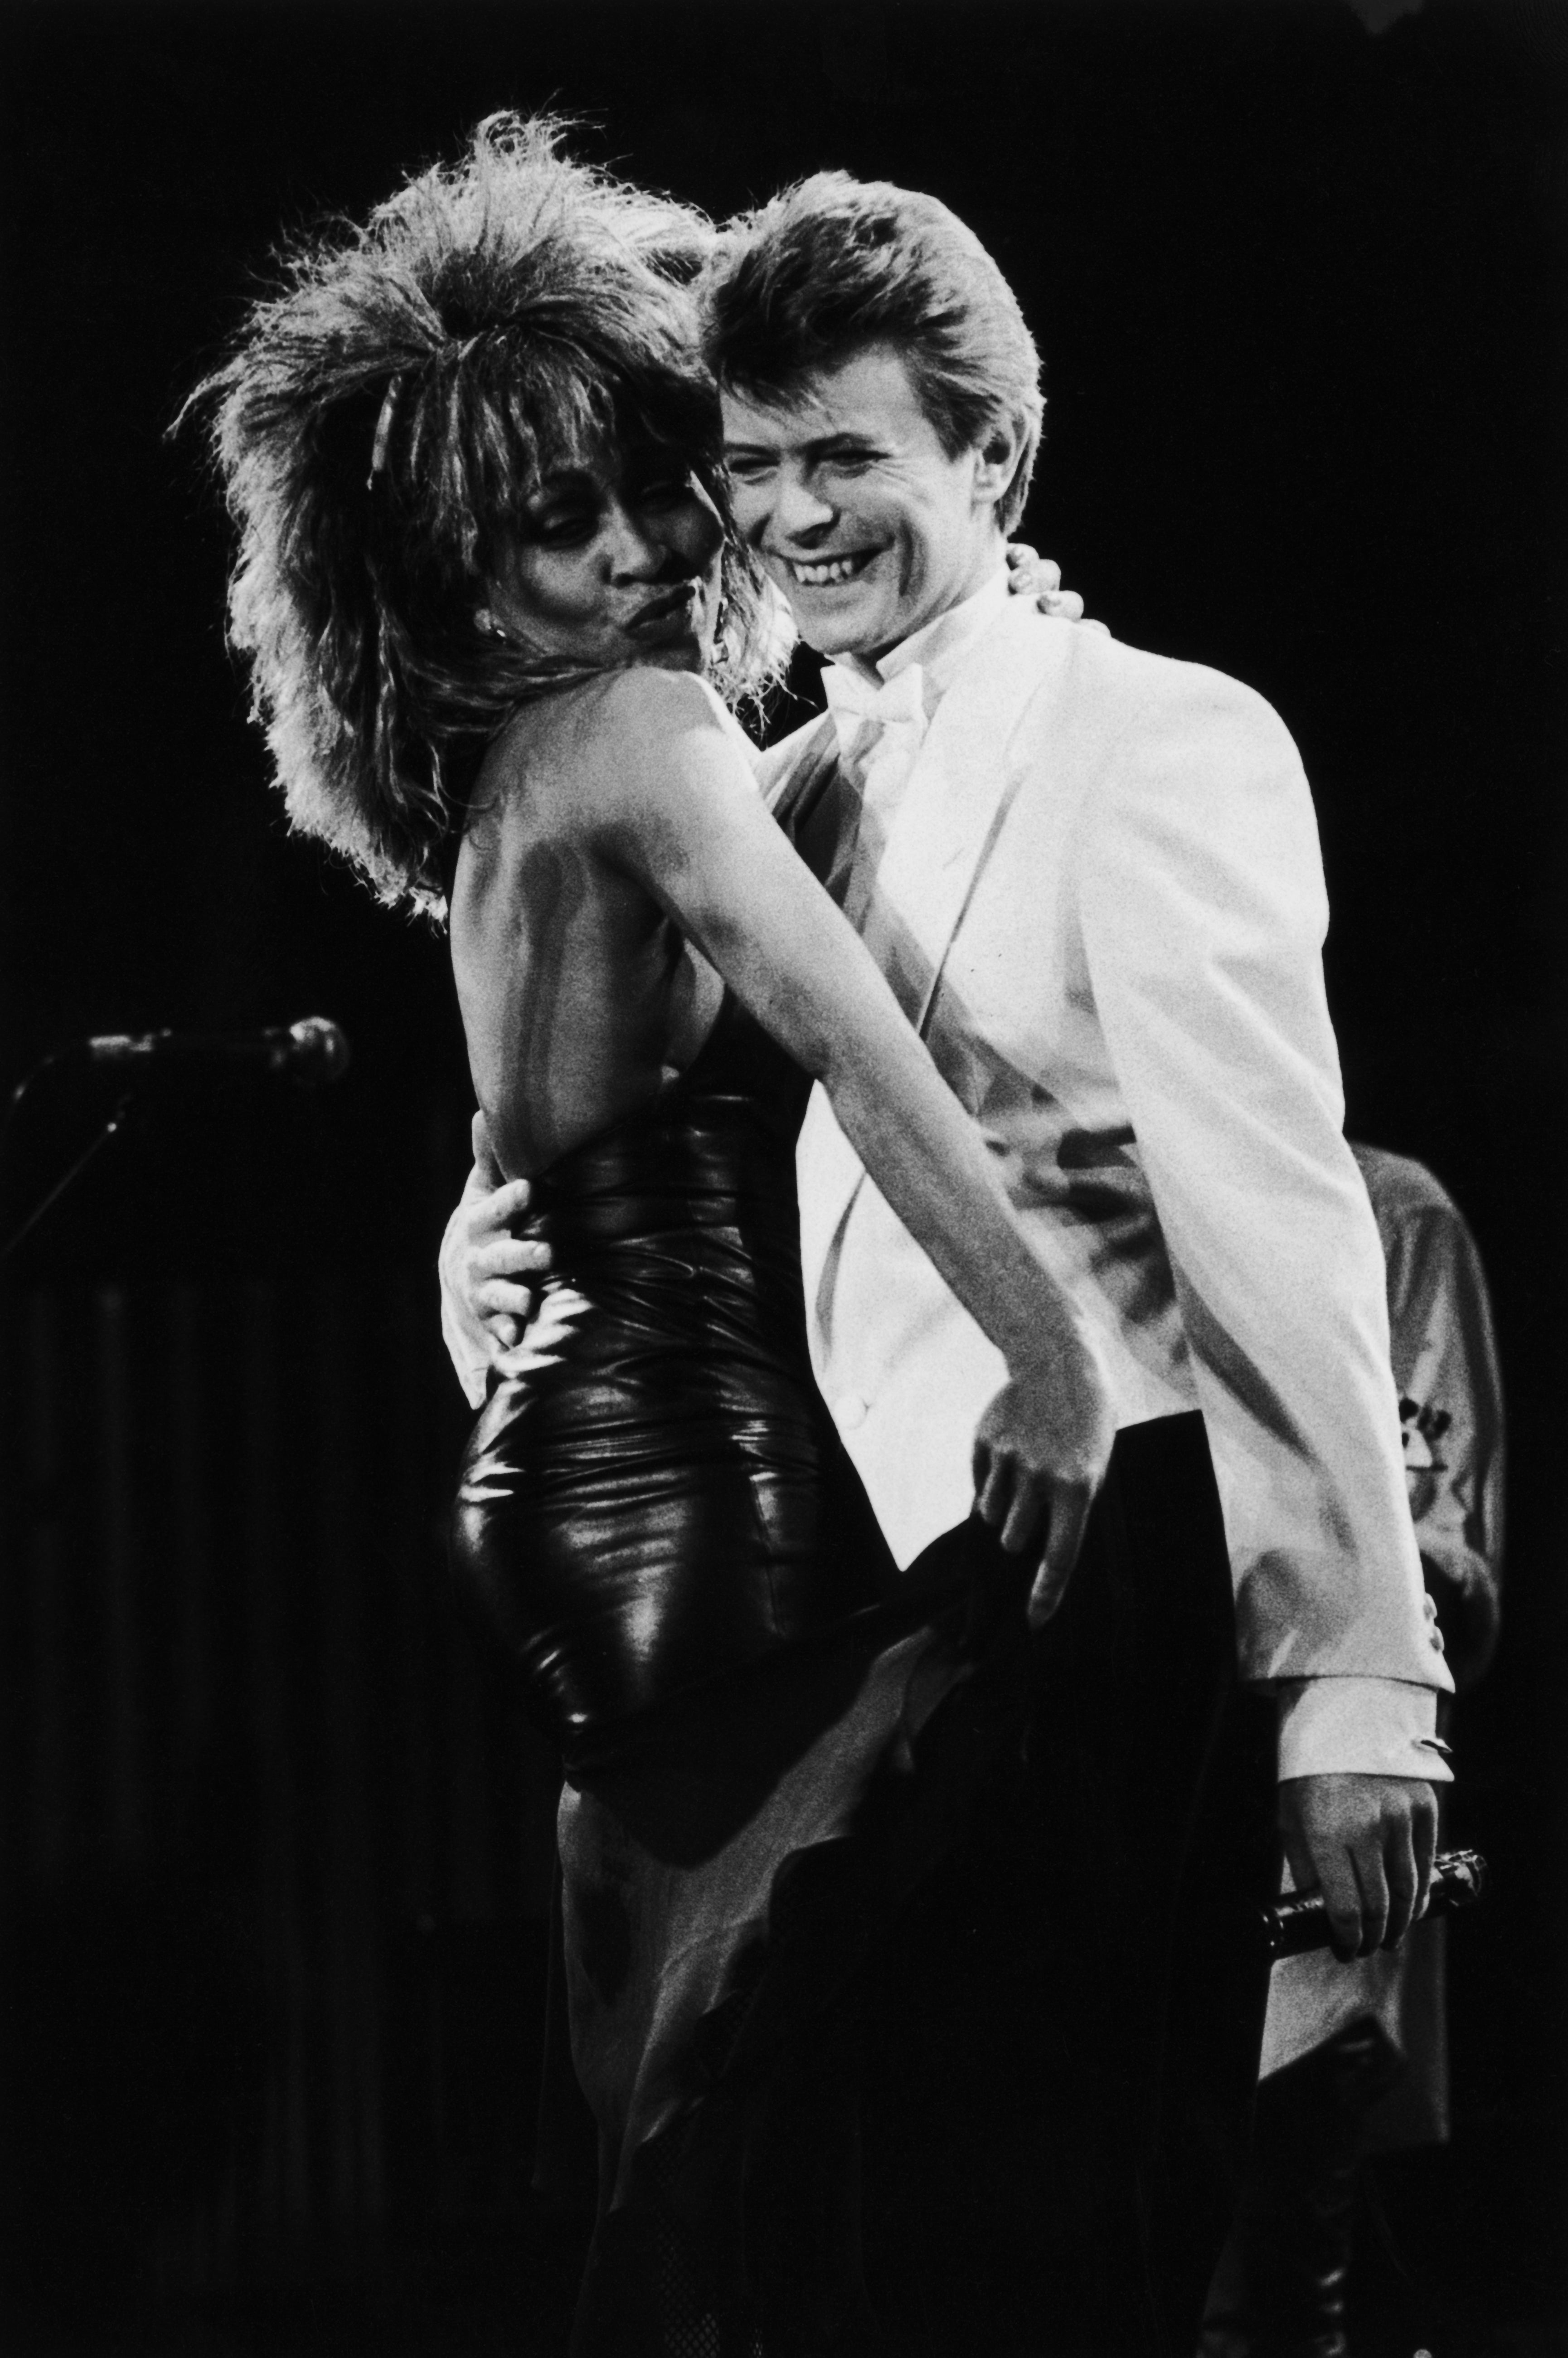 Singers David Bowie and Tina Turner perform on stage